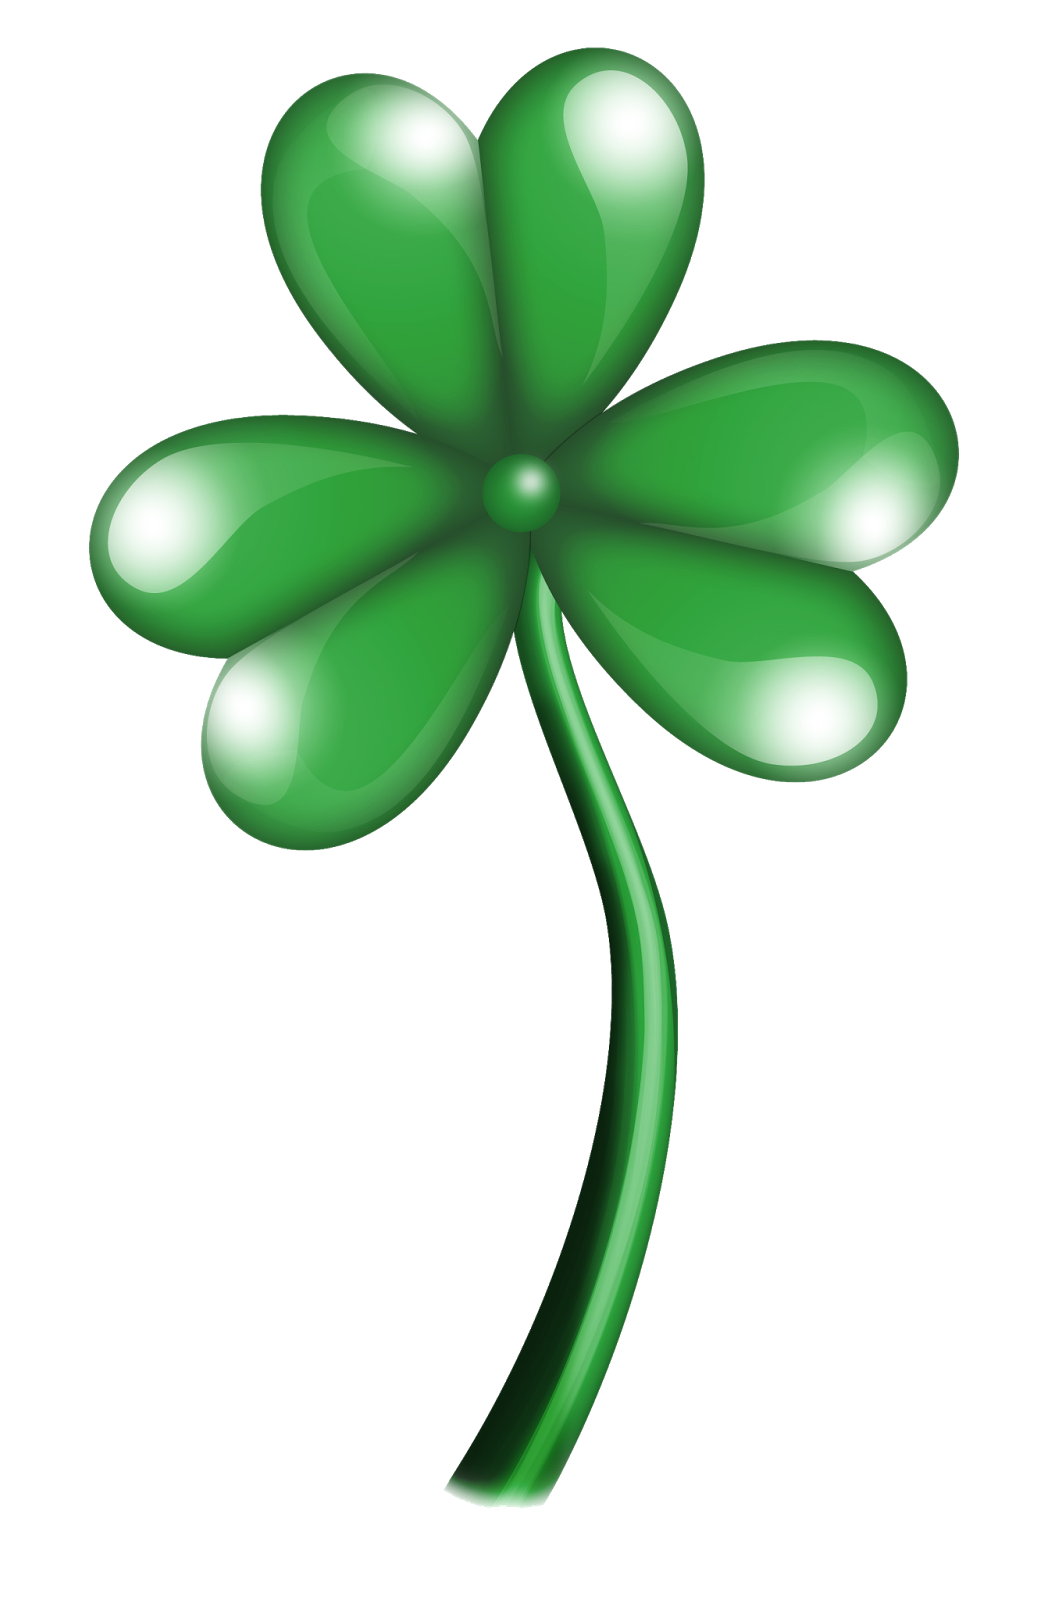 clover clipart march holiday